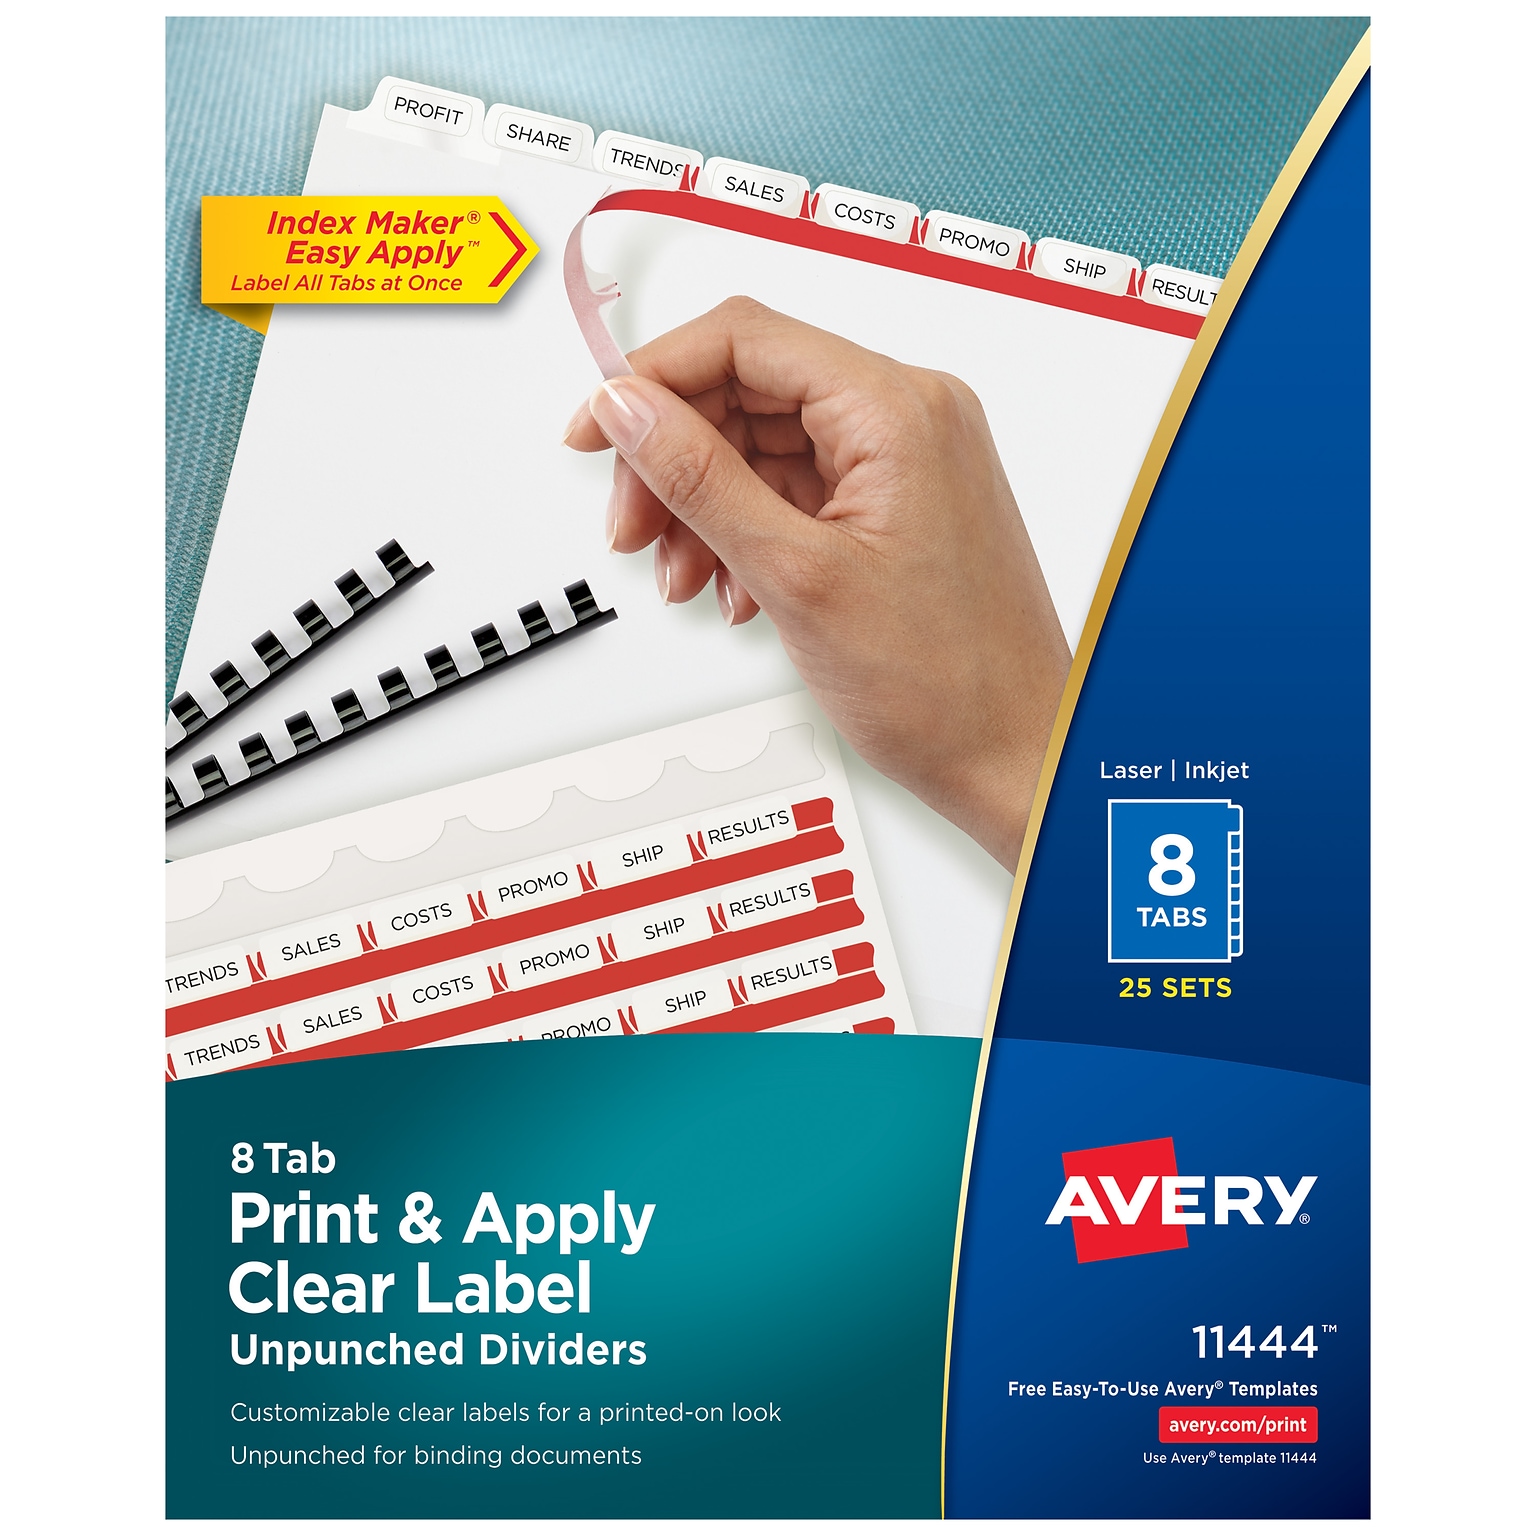 Avery Index Maker Unpunched Paper Dividers with Print & Apply Label Sheets, 8 Tabs, White, 25 Sets/Pack (11444)